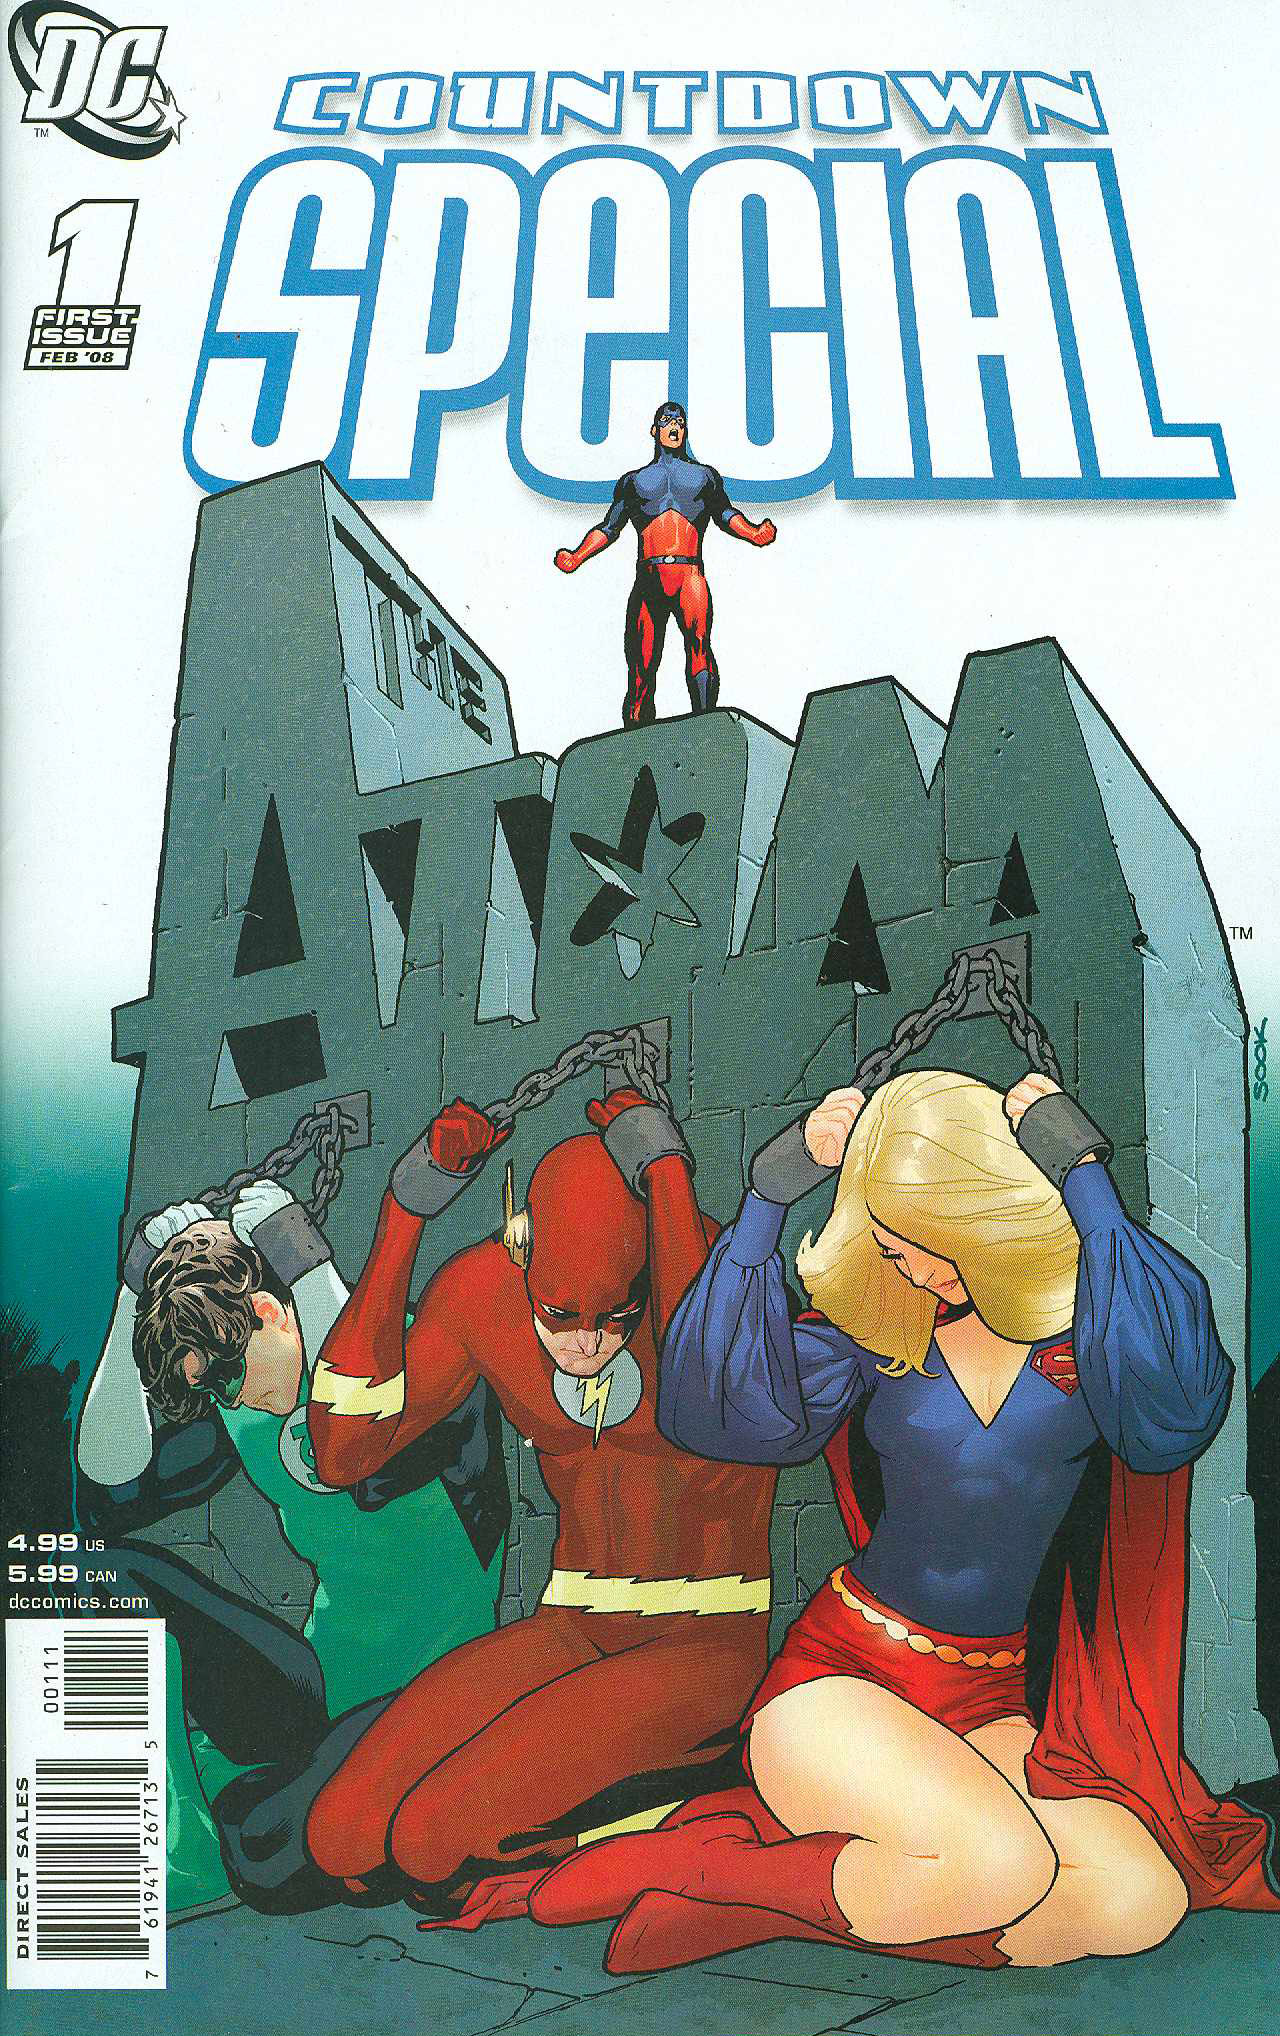 Countdown Special The Atom 80 Page Giant #1